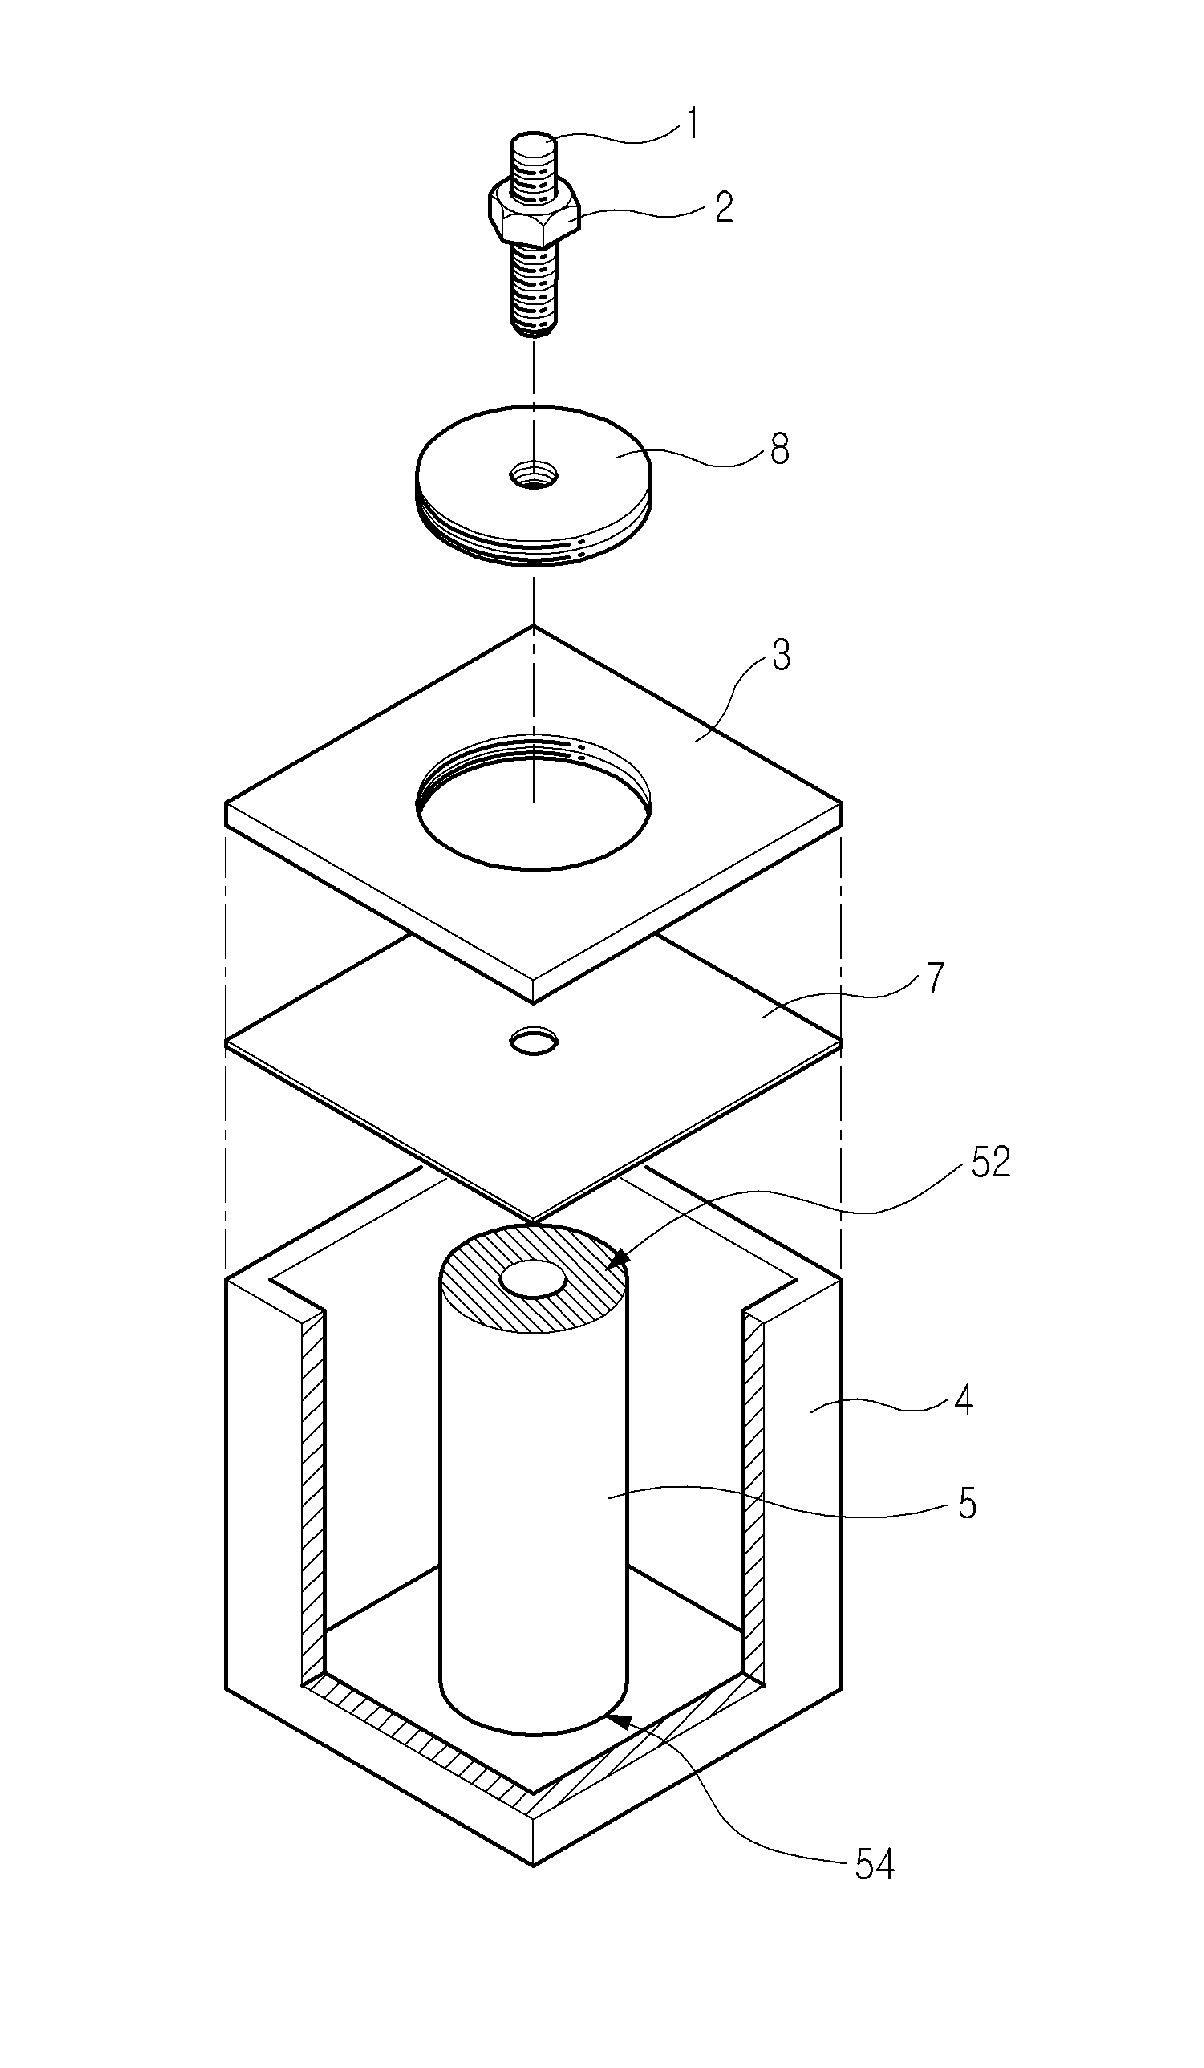 Dielectric resonator in RF filter and assembley method therefor